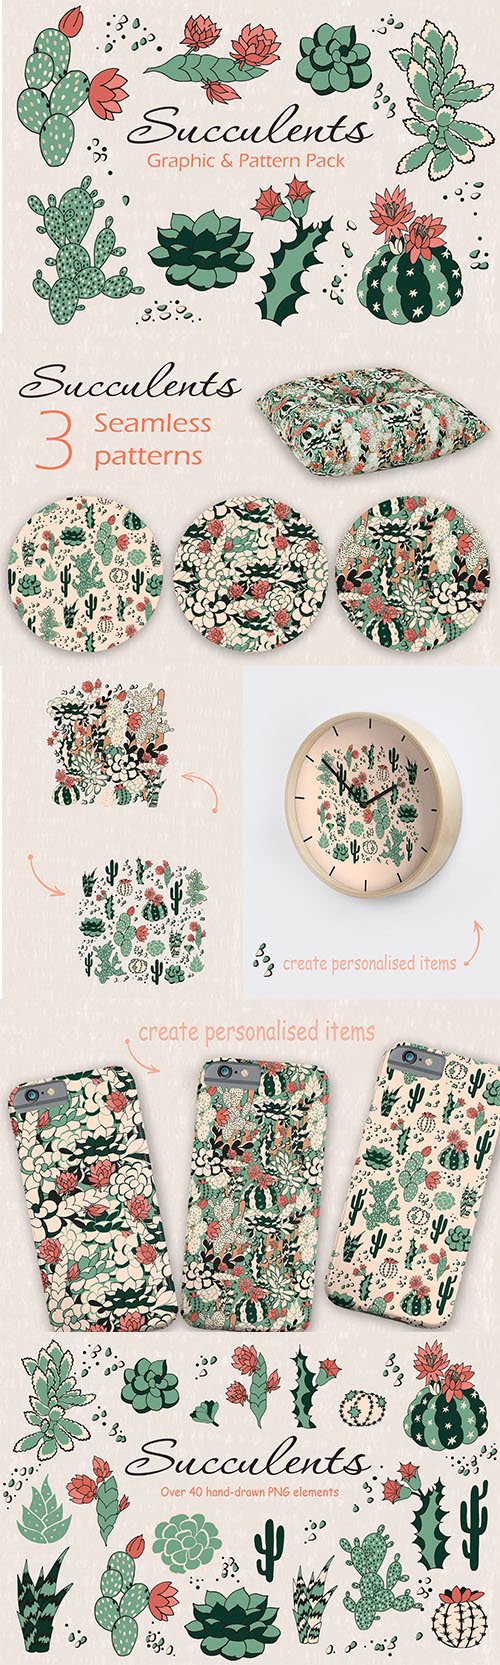 Succulents Graphic and Pattern Pack